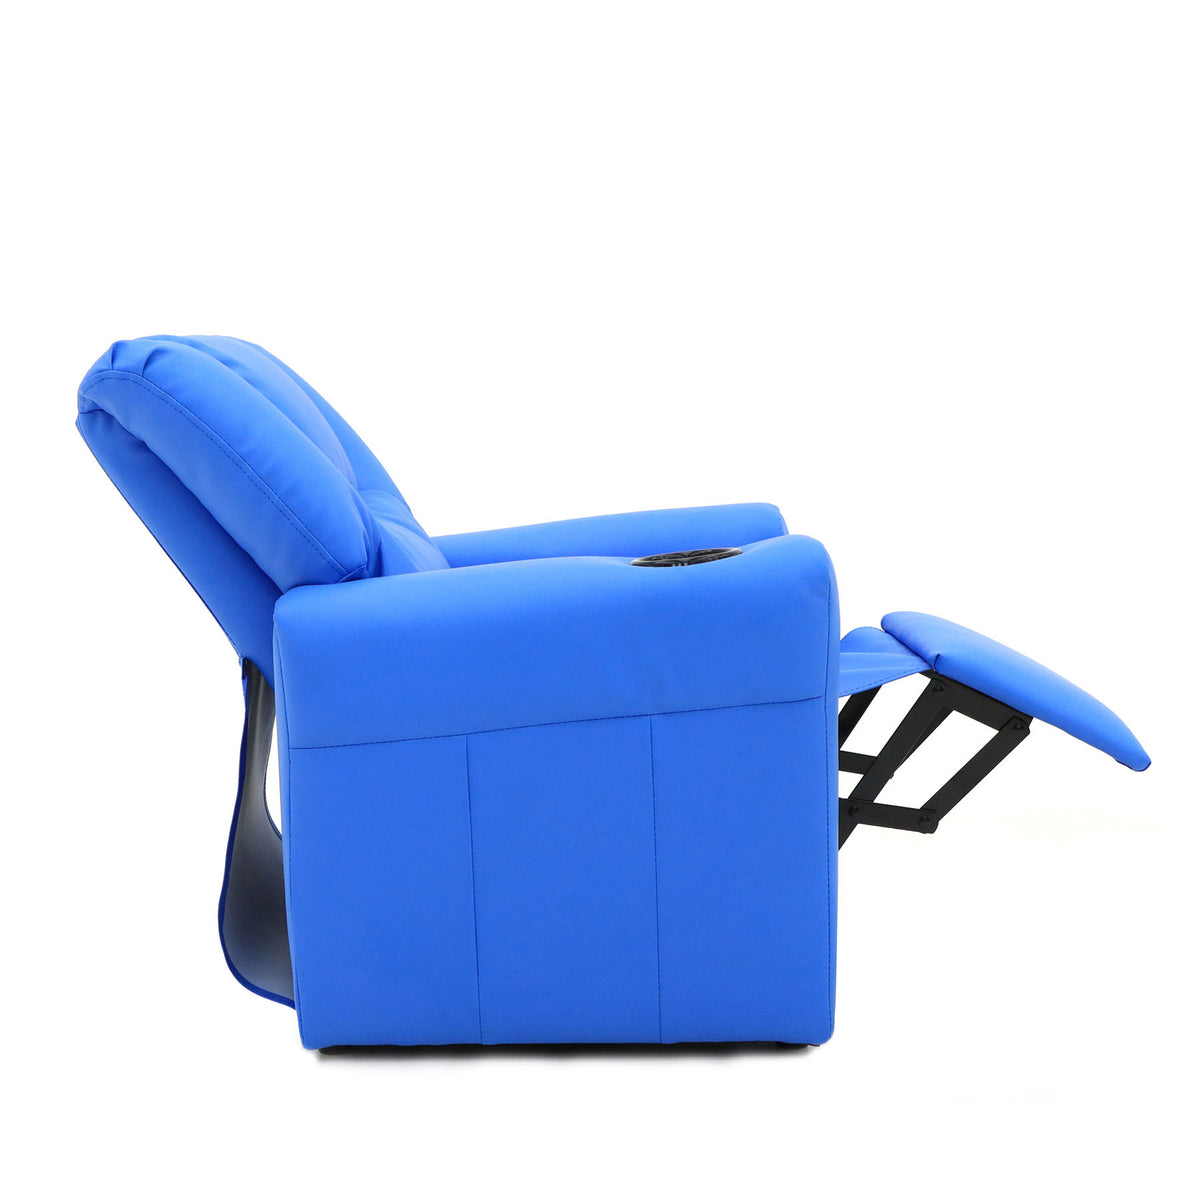 Side view of the Blue Kids Recliner Chair in a reclined position.